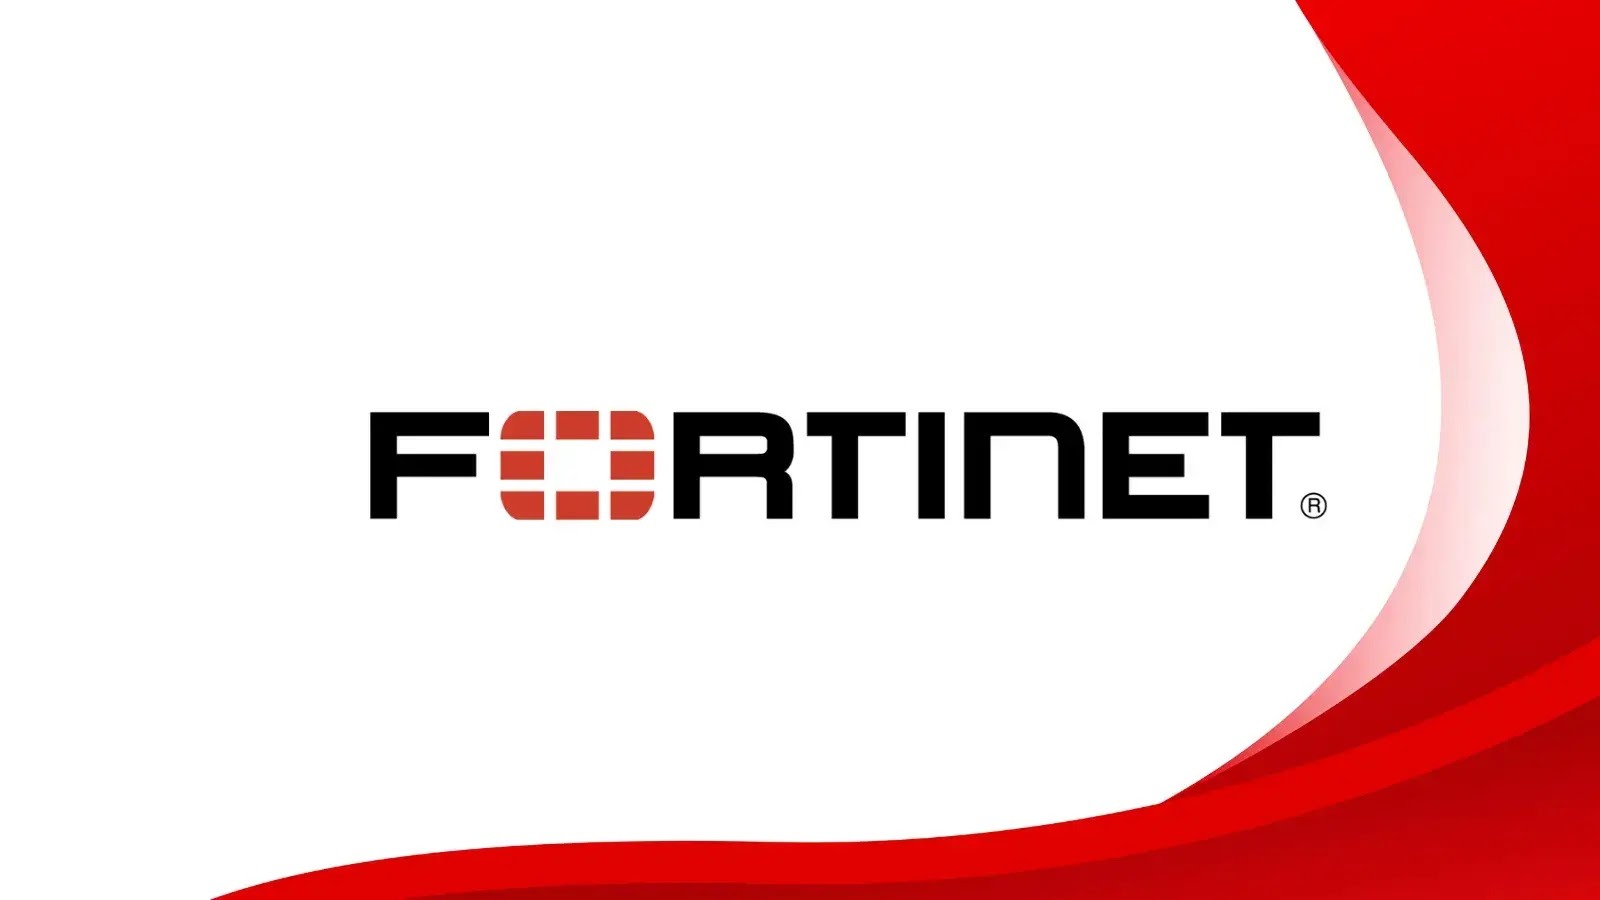 alt=Logo of Fortinet, a cybersecurity company, featuring a shield with a stylized letter "F" inside.